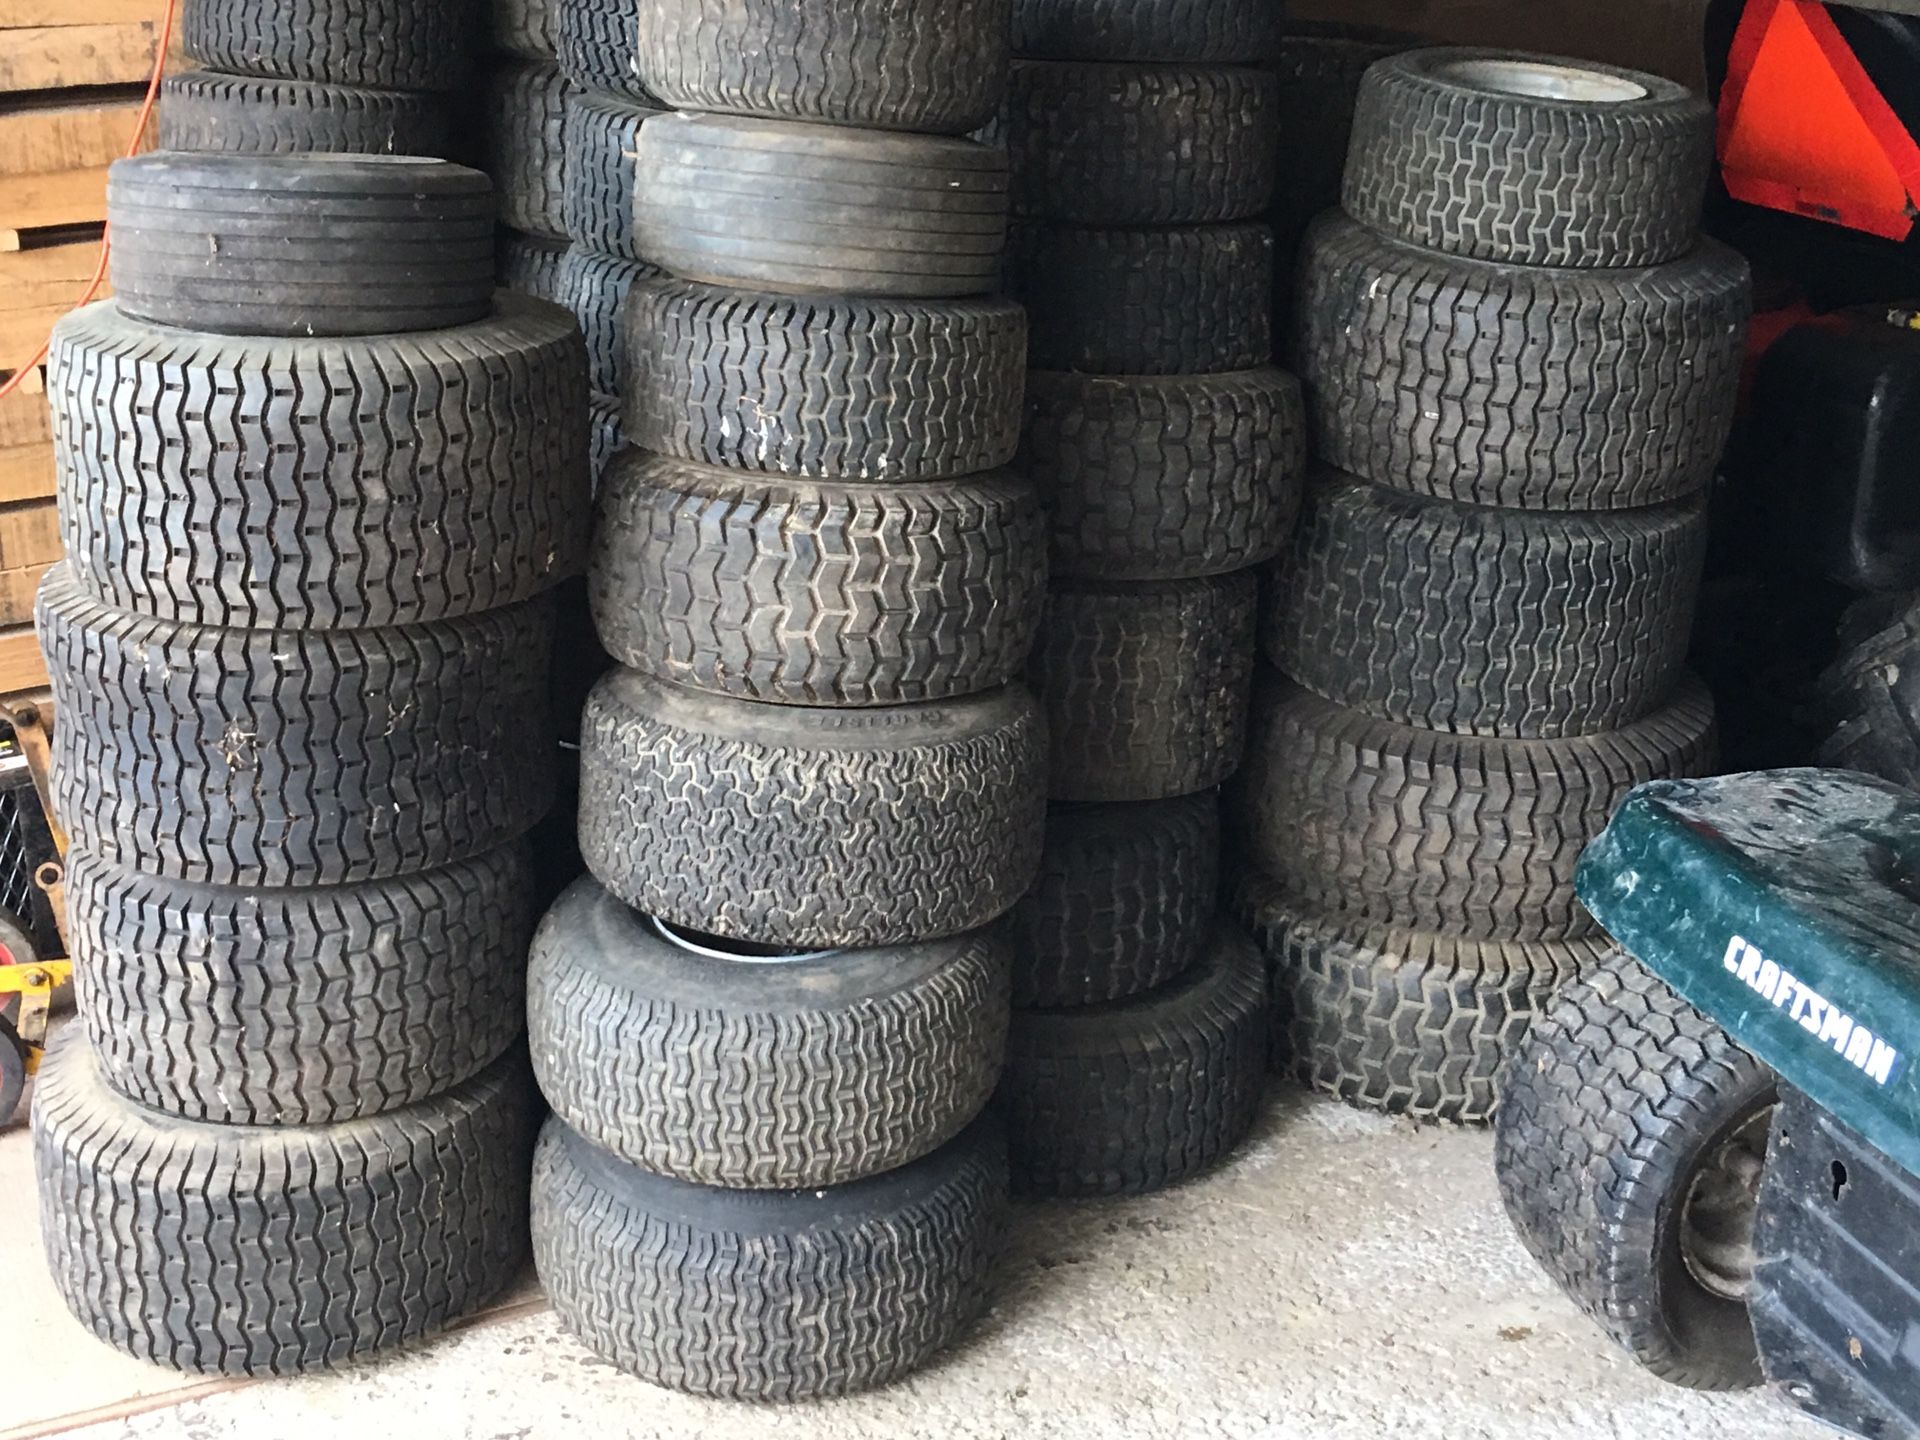 Lawn mower tires, tractor tires, riding mower tires